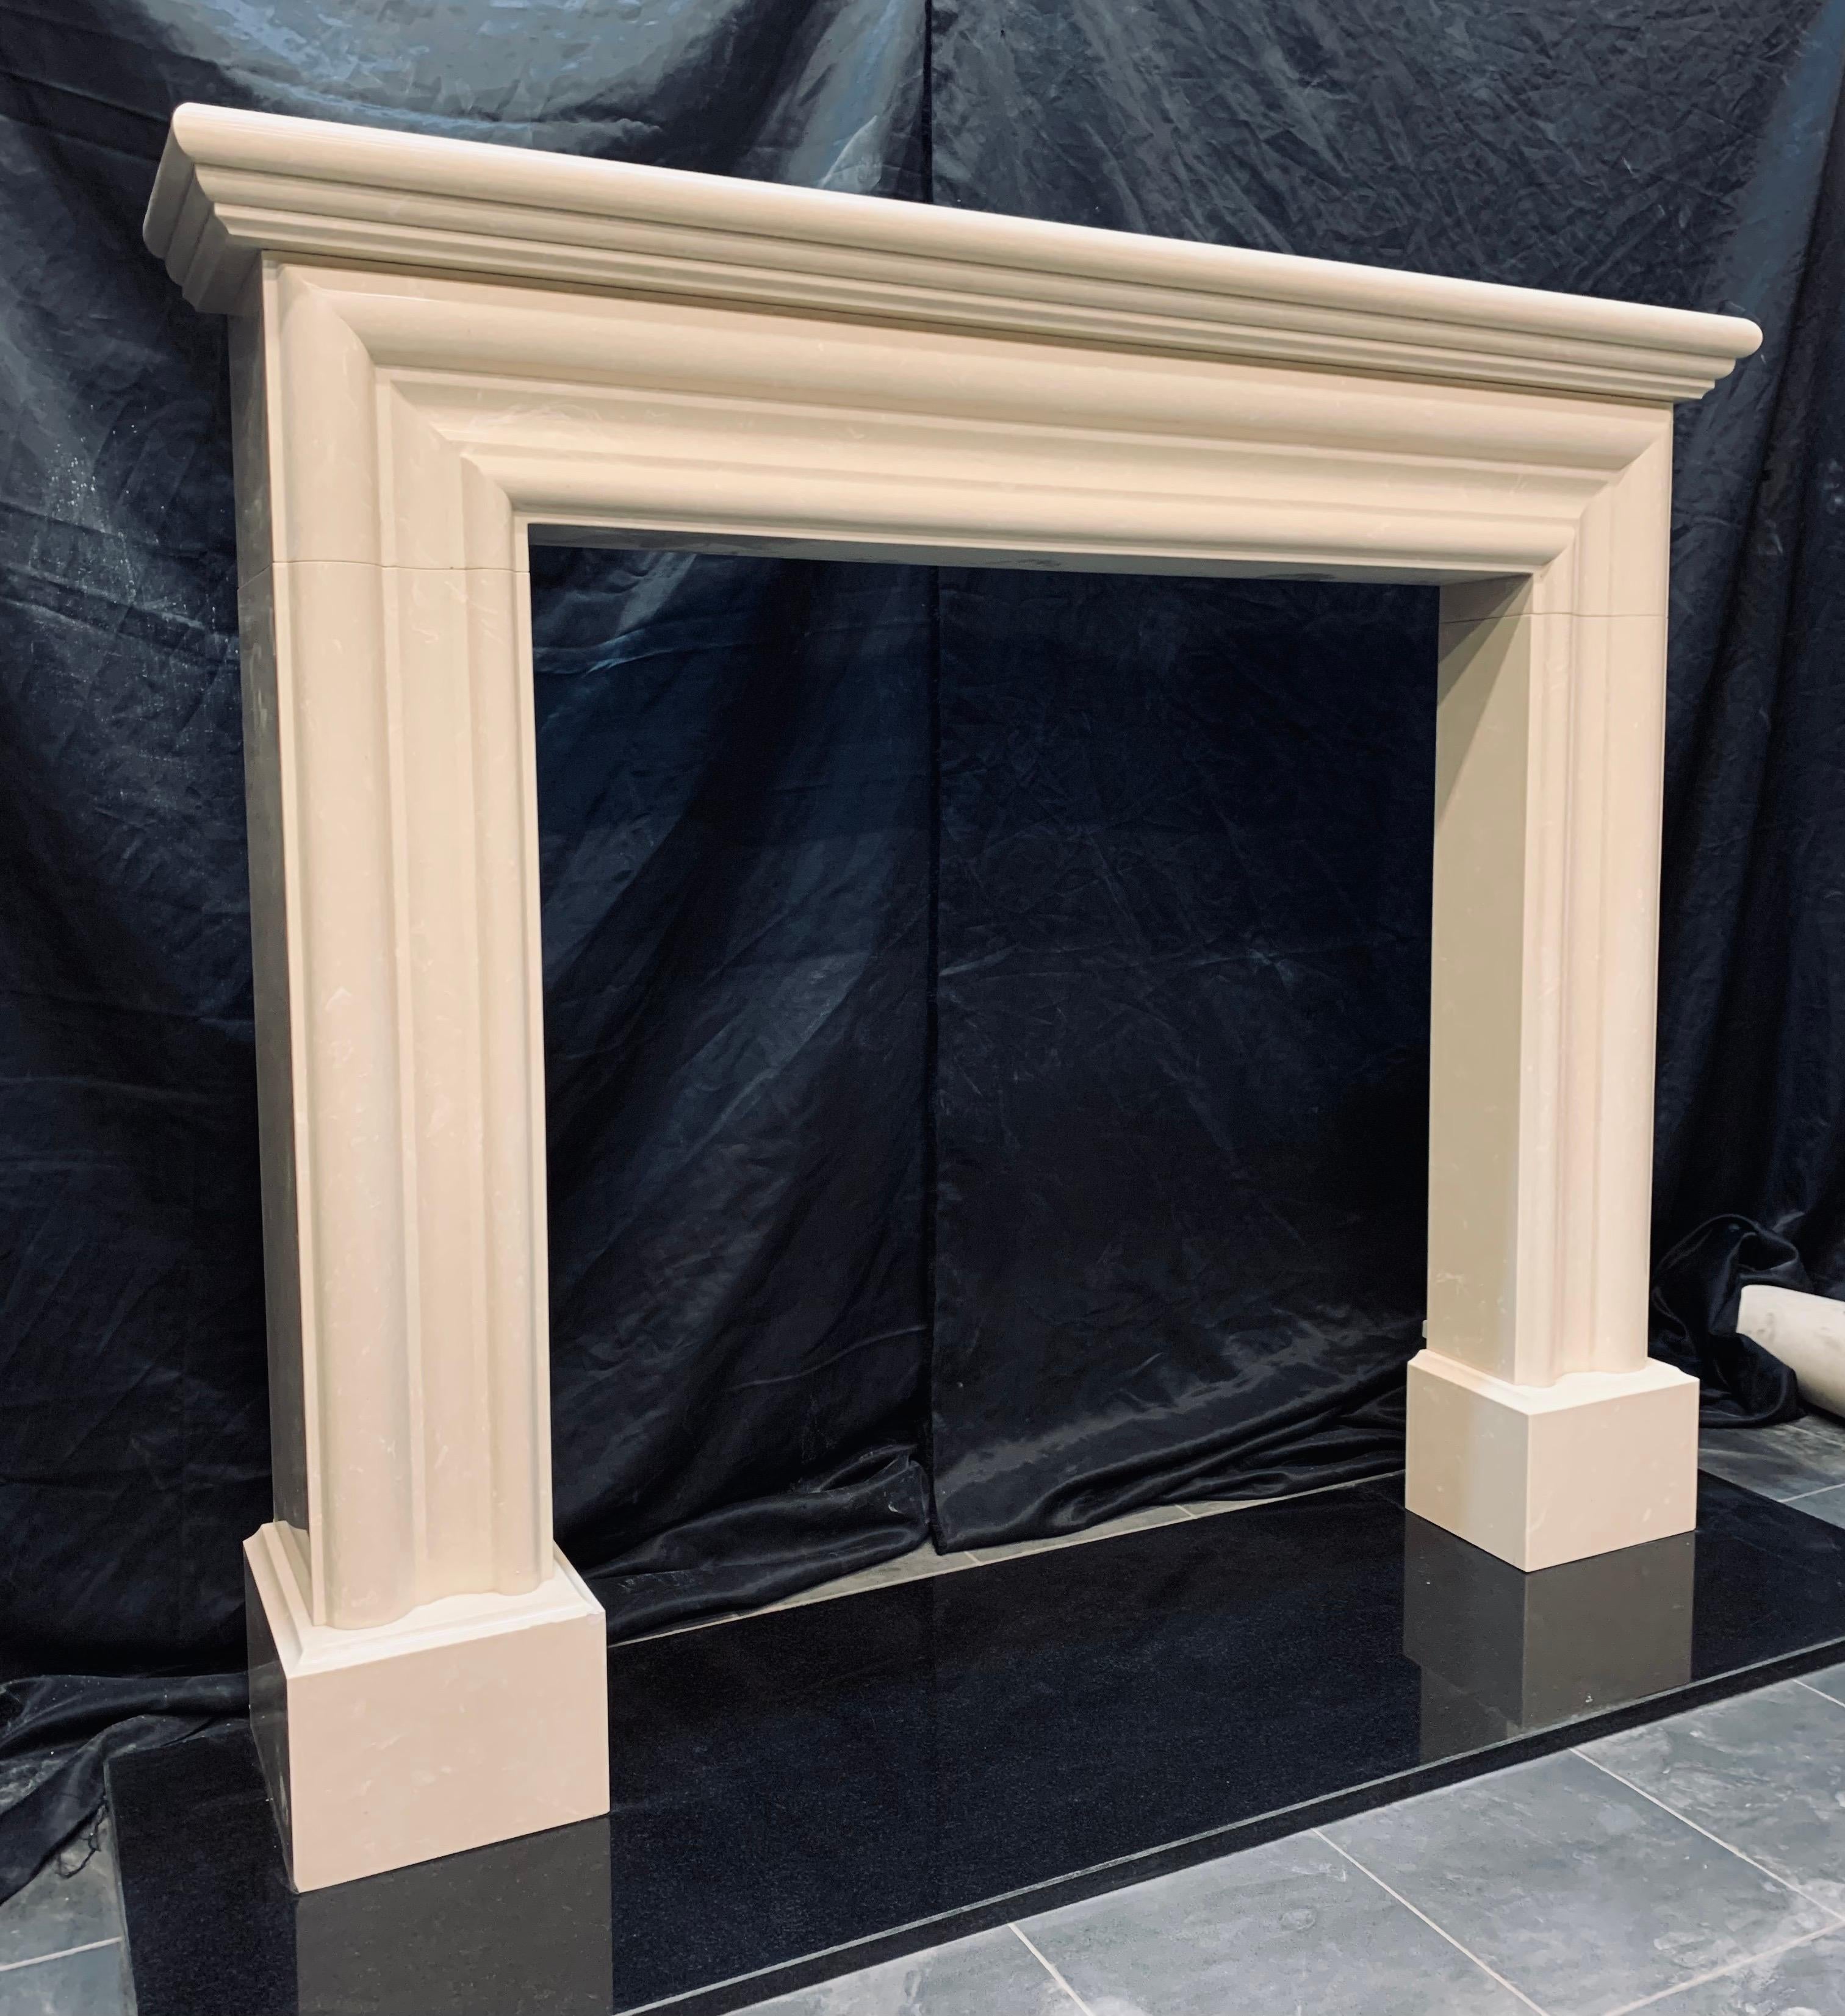 A versatile and elegant bolection fireplace surround in Crema Marfil, a carved bolection frame with side returns and a profiled shelf on top, all resting on moulded foot blocks. 

Crema Marfil marble presents a delectably creamy façade,